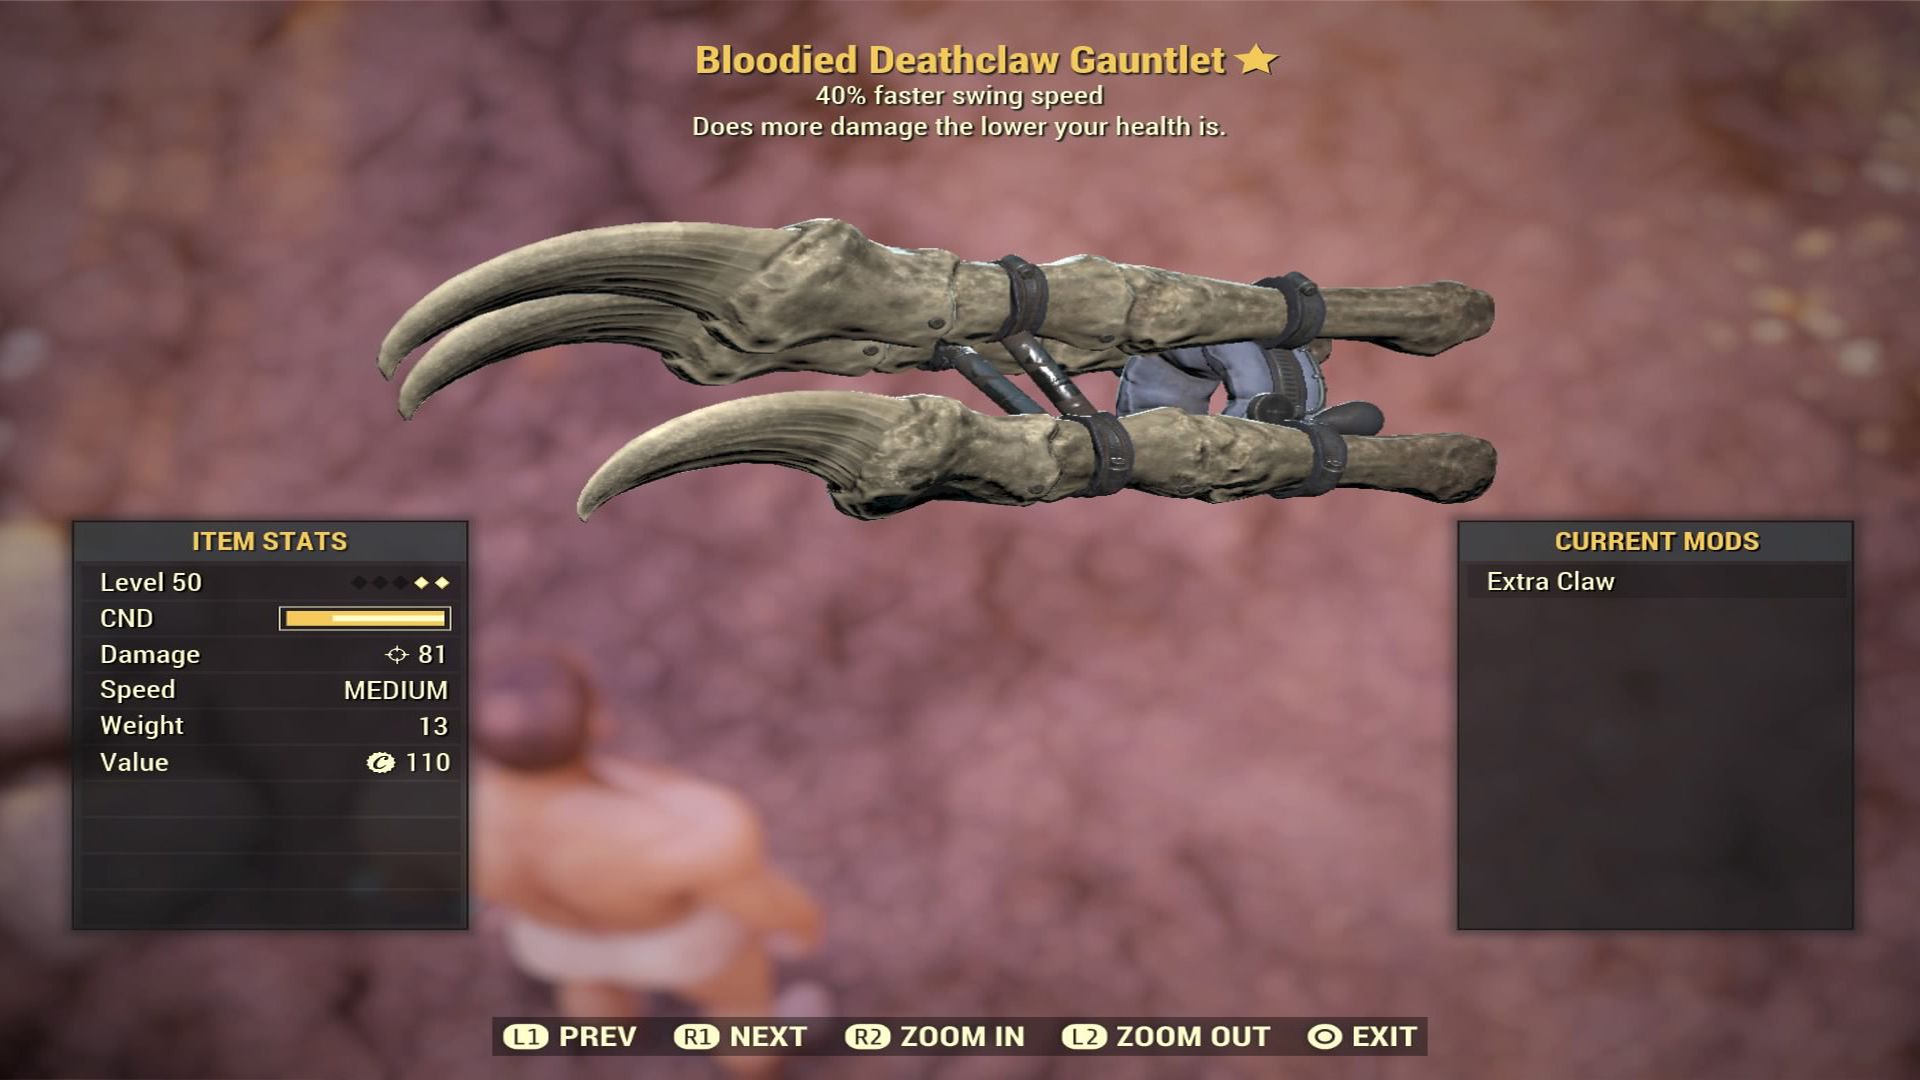 Fallout 76 Bloodied Deathclaw Gauntlet - Level 50